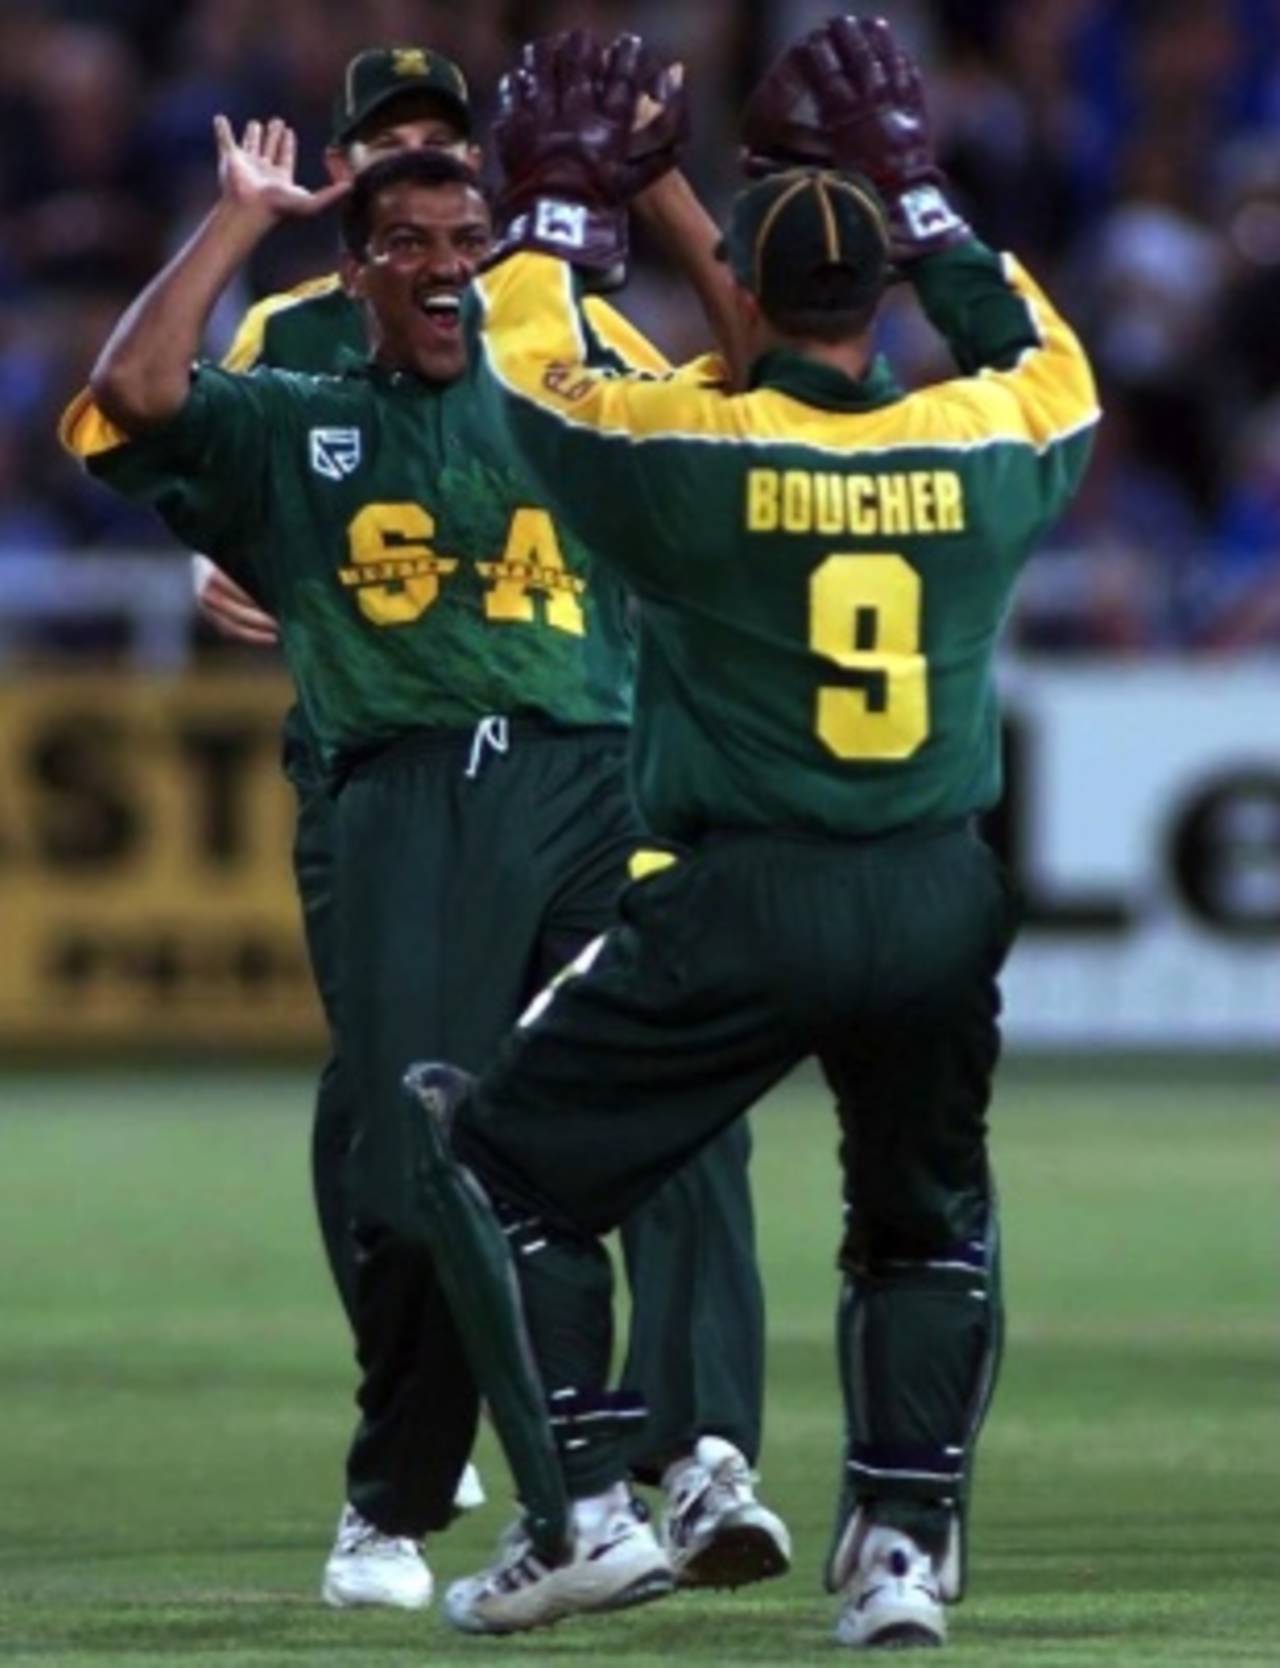 Henry Williams celebrates a wicket, South Africa v England, Newlands, Cape Town, January 26, 2000